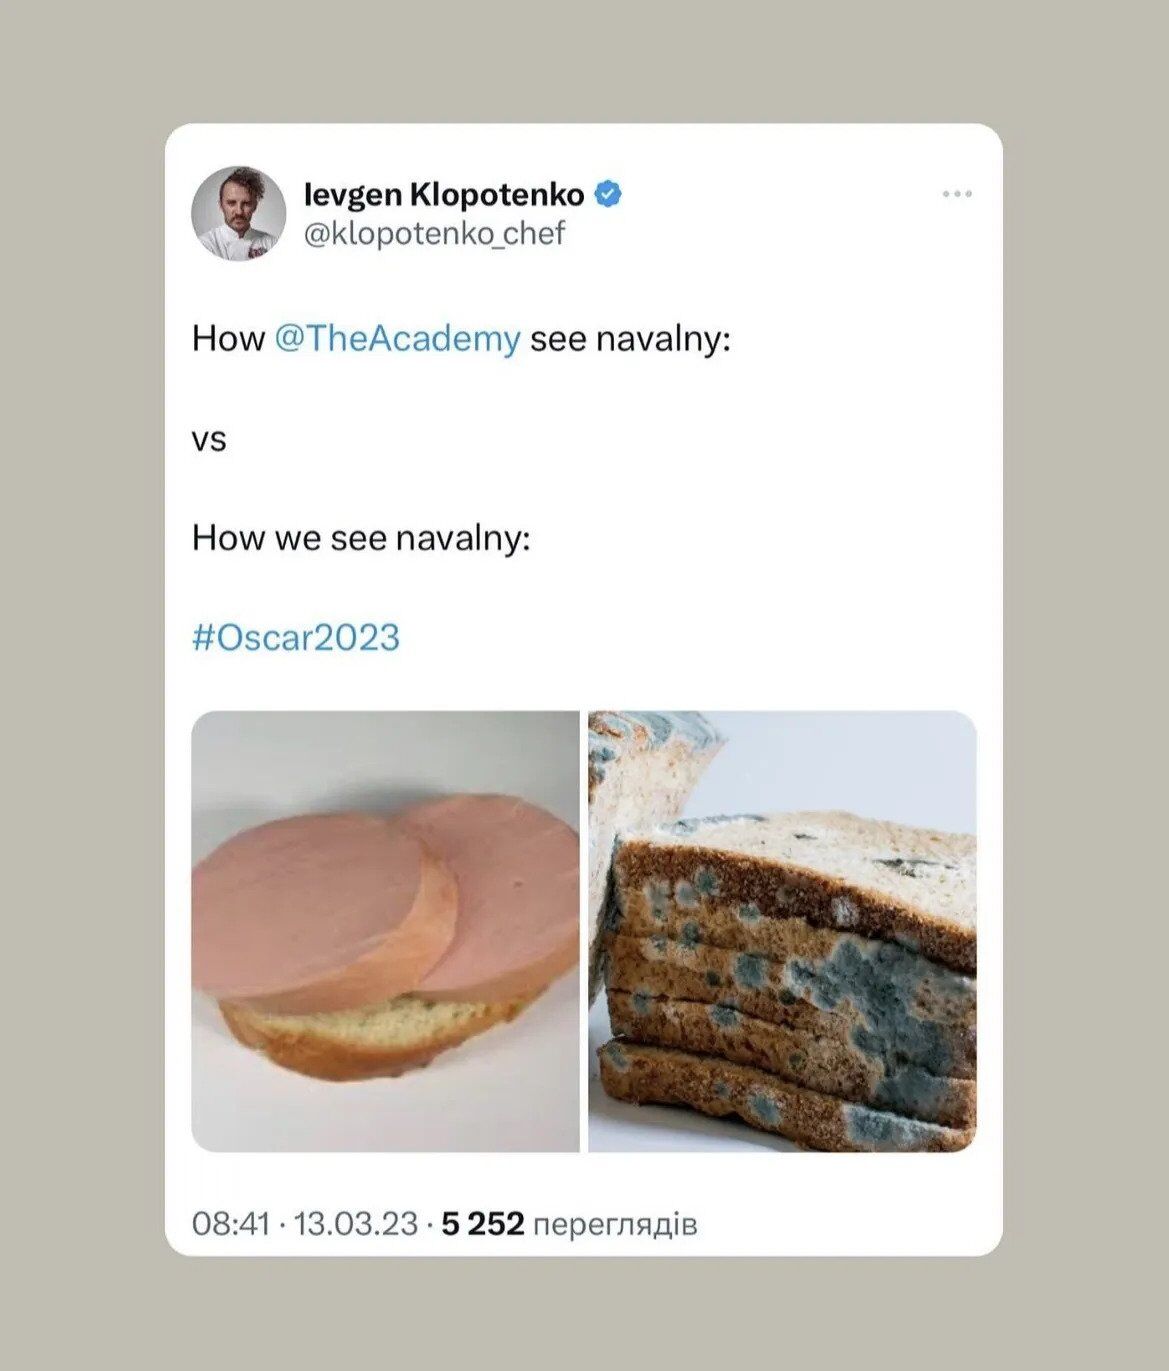 ''This is the bottom'': Ukrainians reacted to Navalny's wife's performance at the Oscars 2023